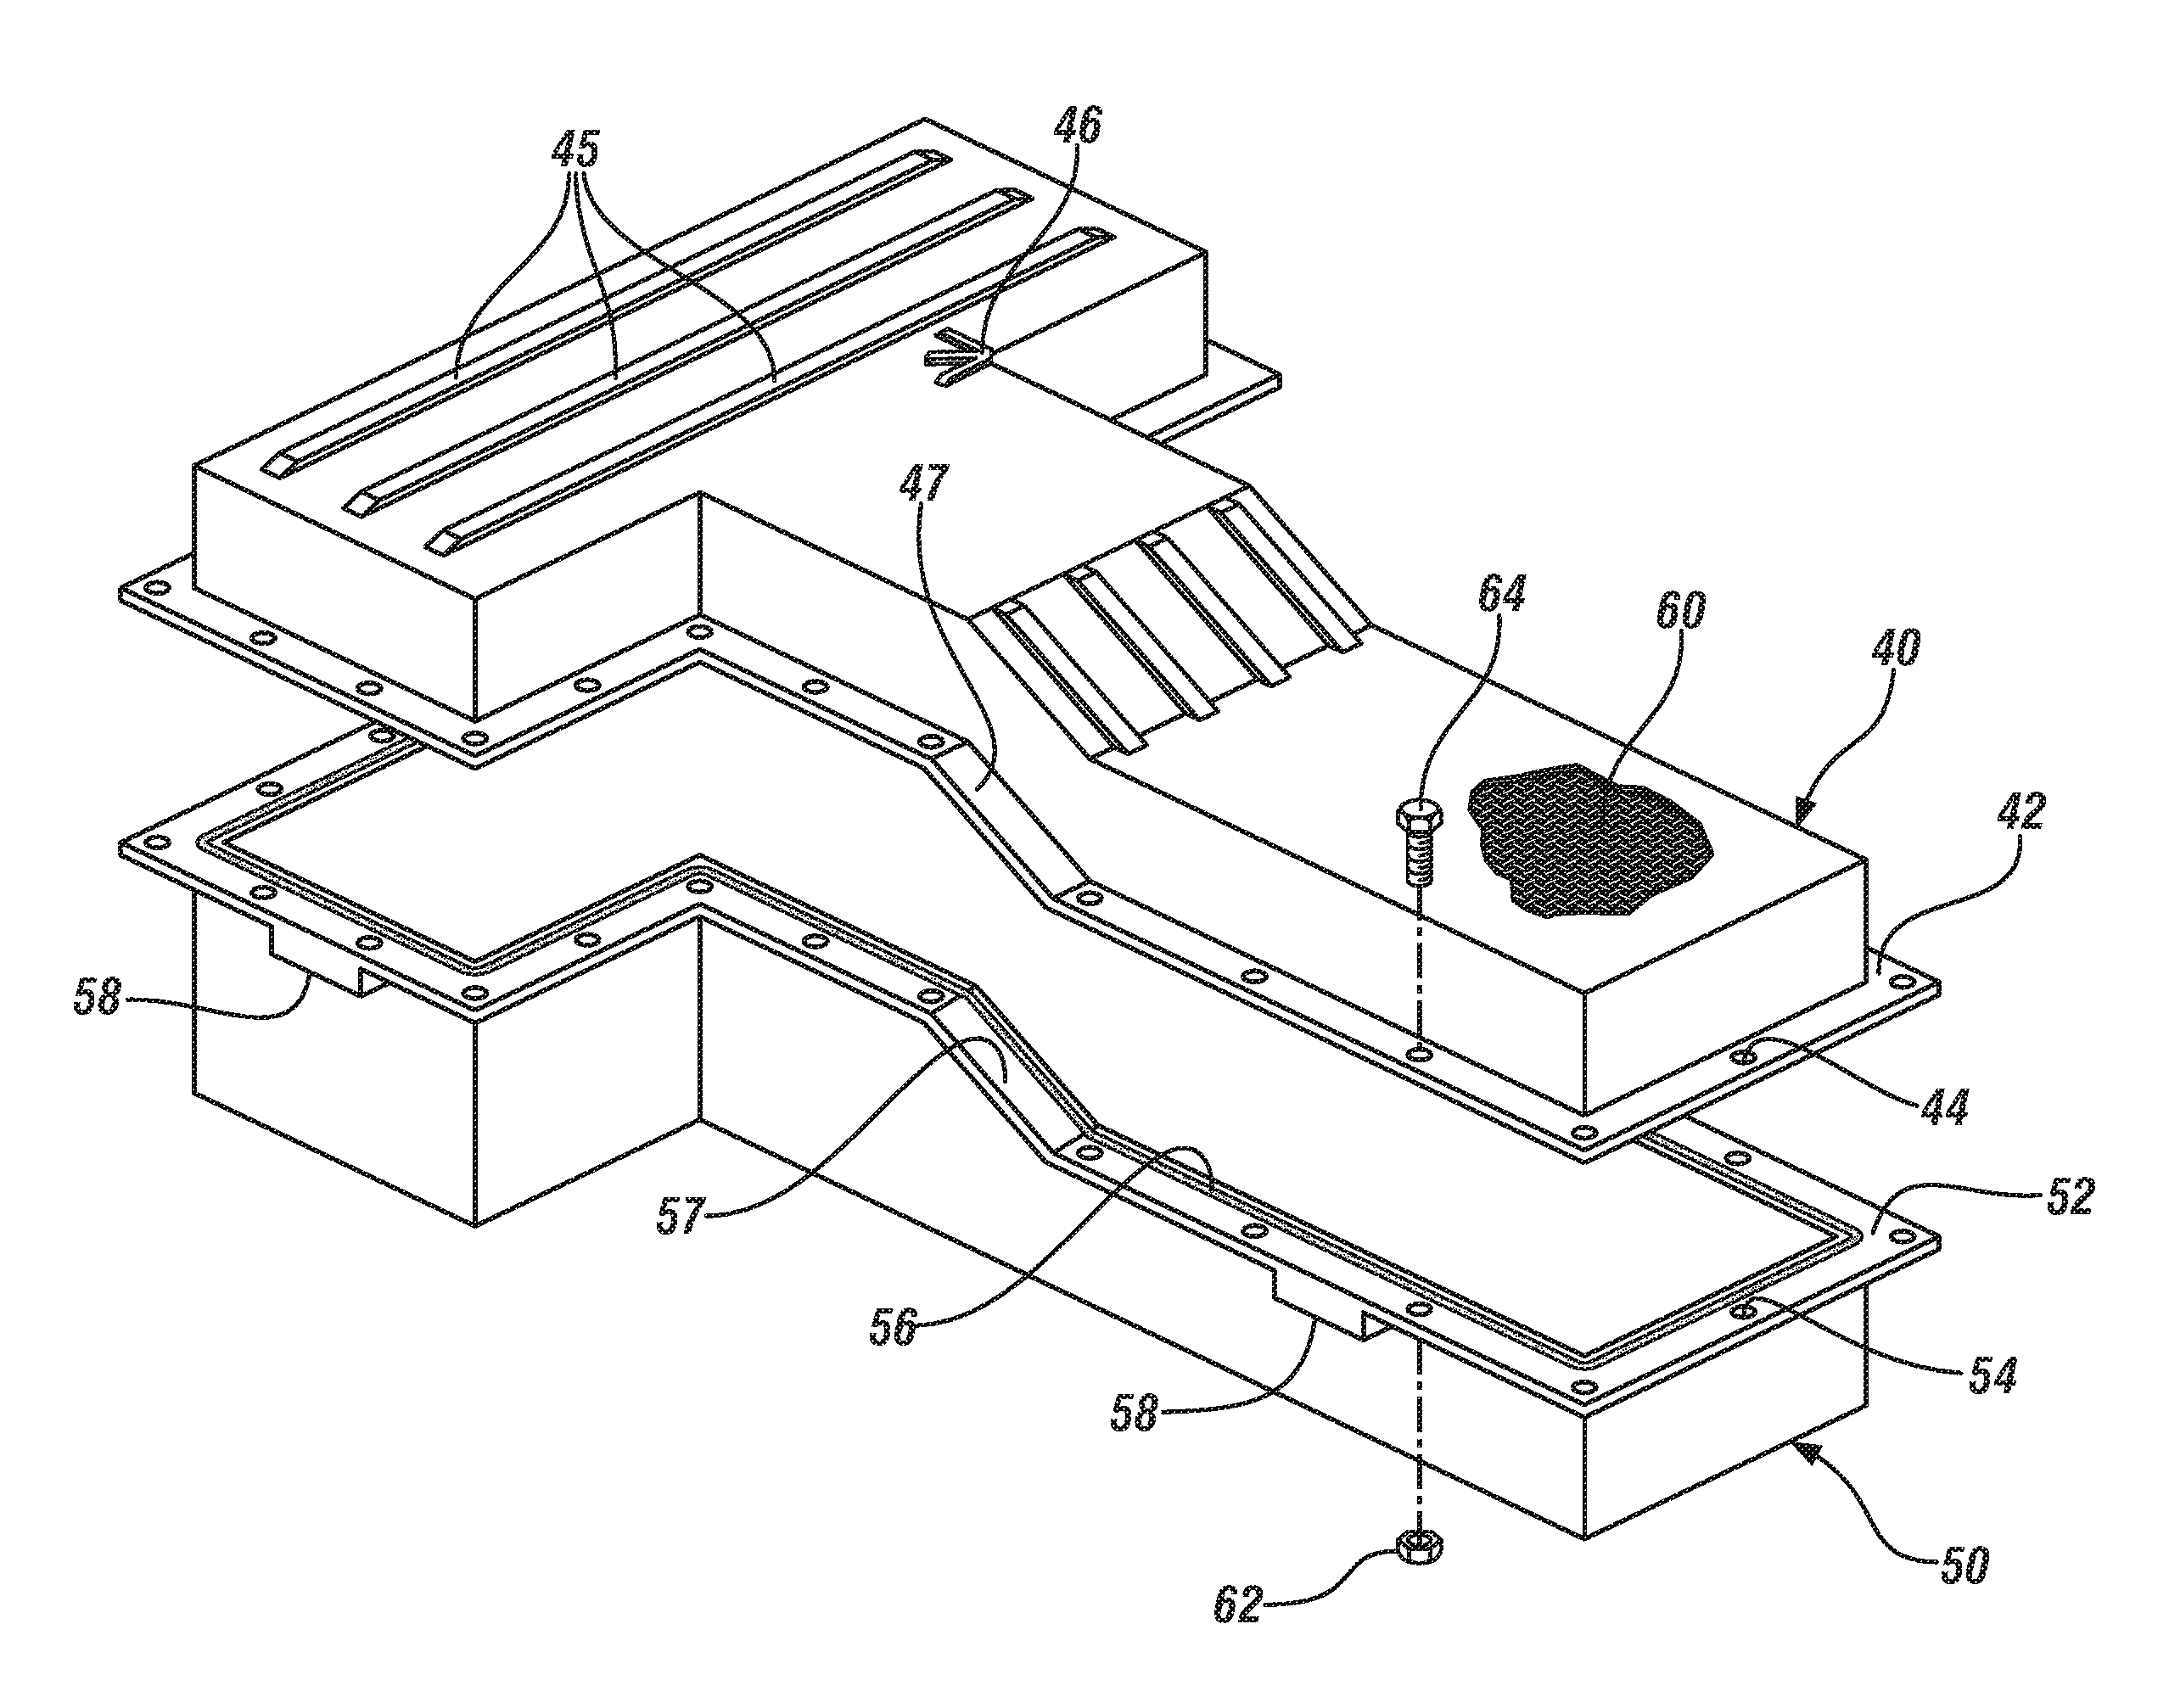 Fabric composite support or enclosure for an automotive battery pack